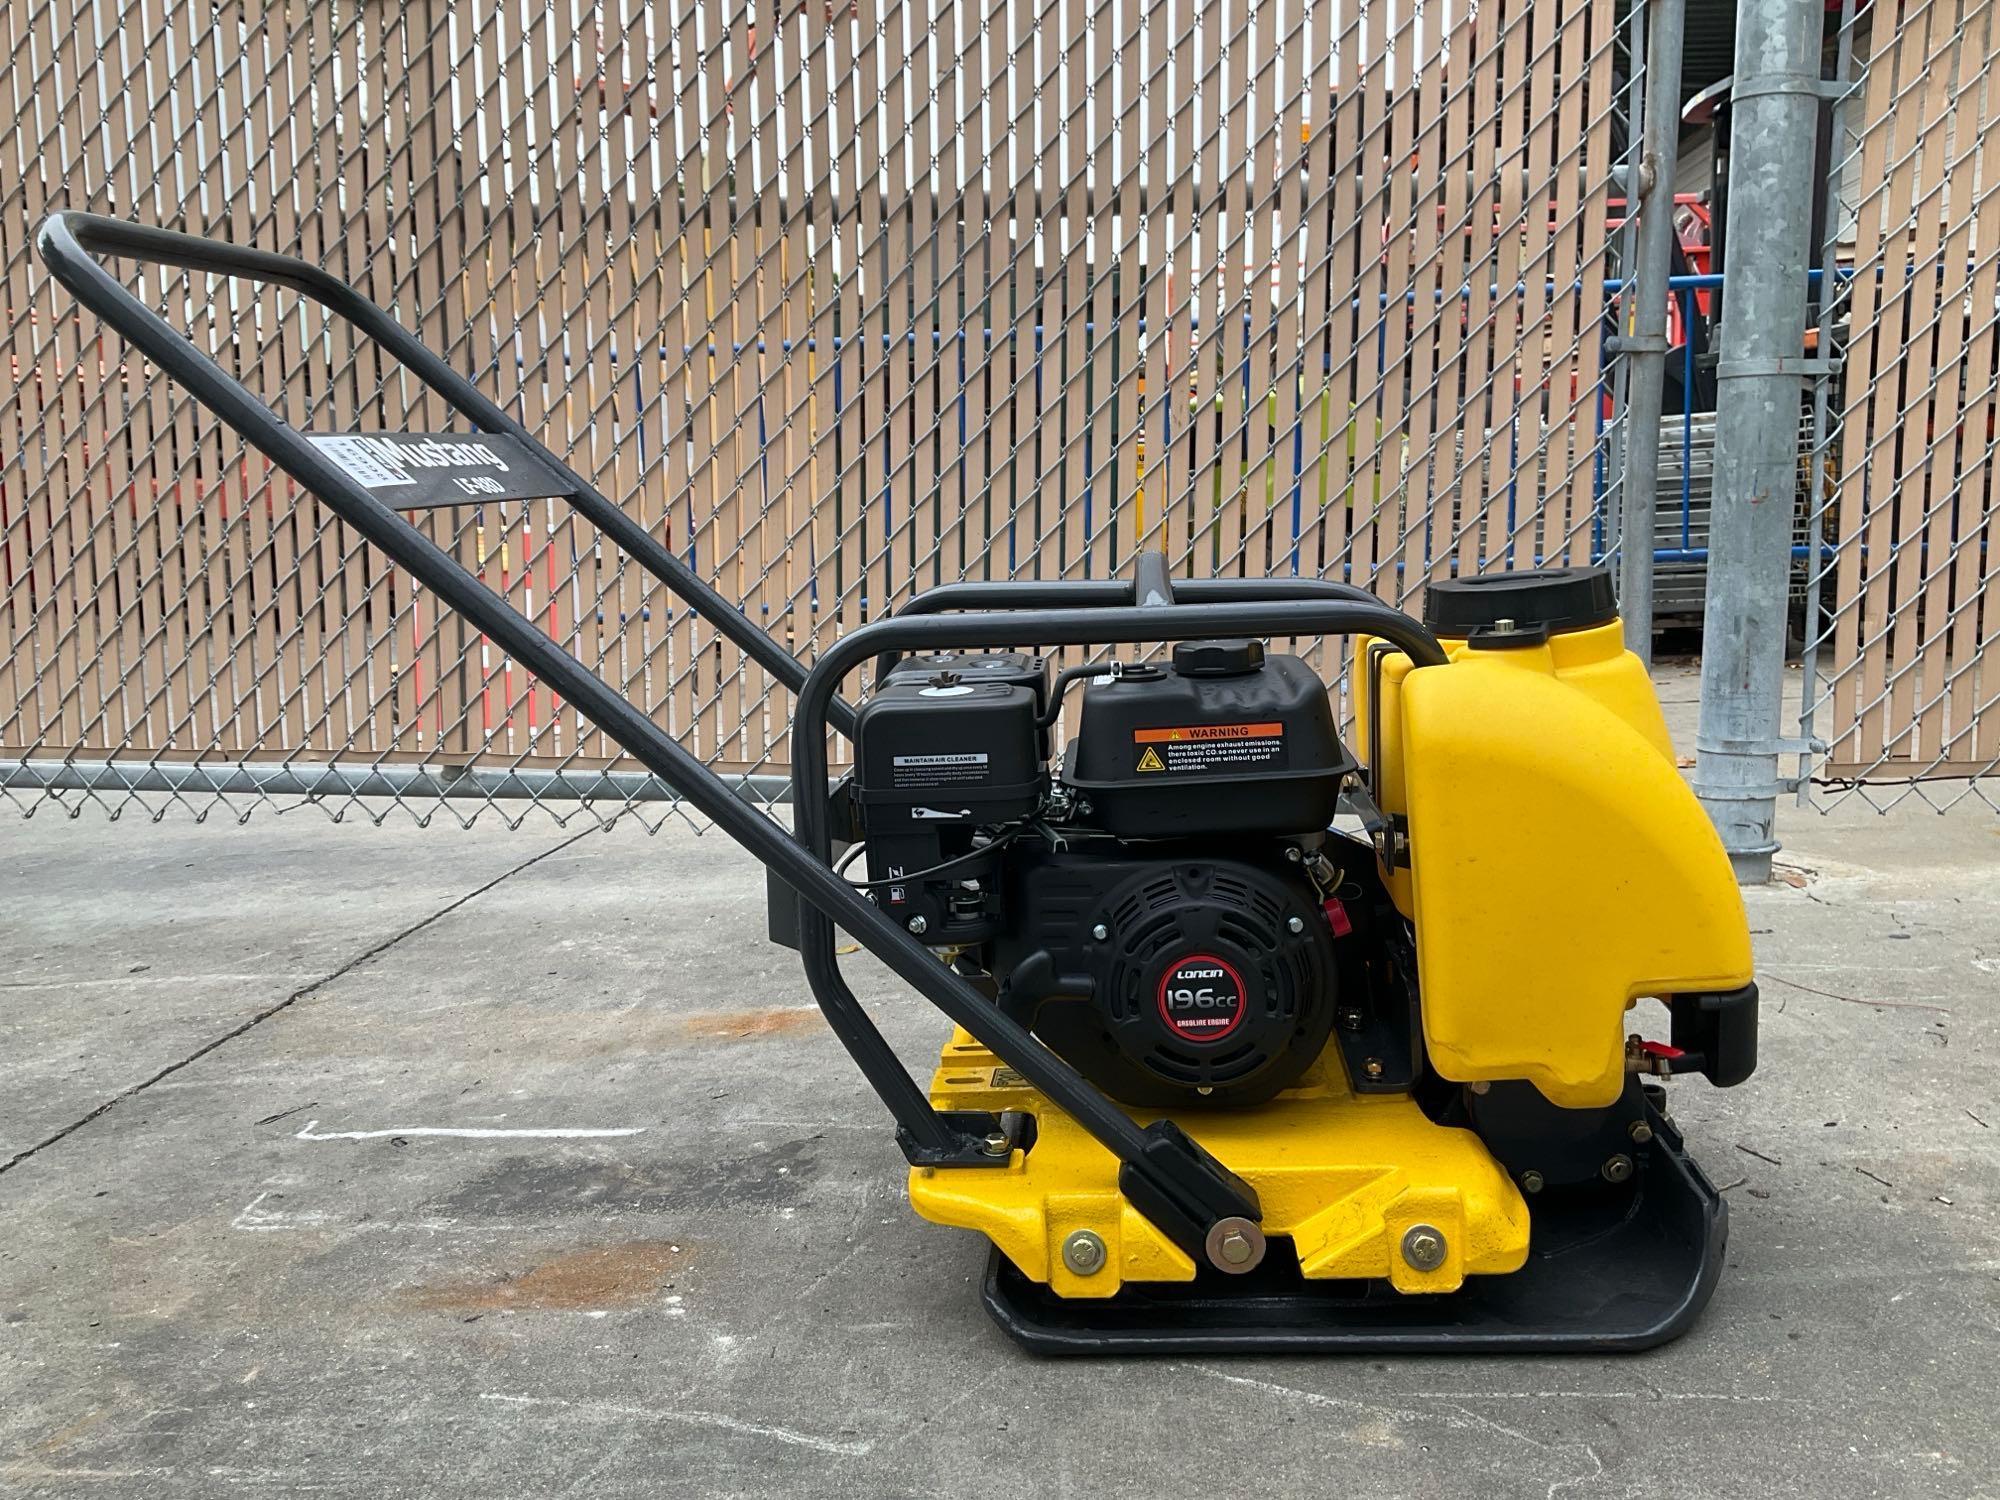 UNUSED MUSTANG LF-88 PLATE COMPACTOR WITH LONCIN 196cc ENGINE, GAS POWERED